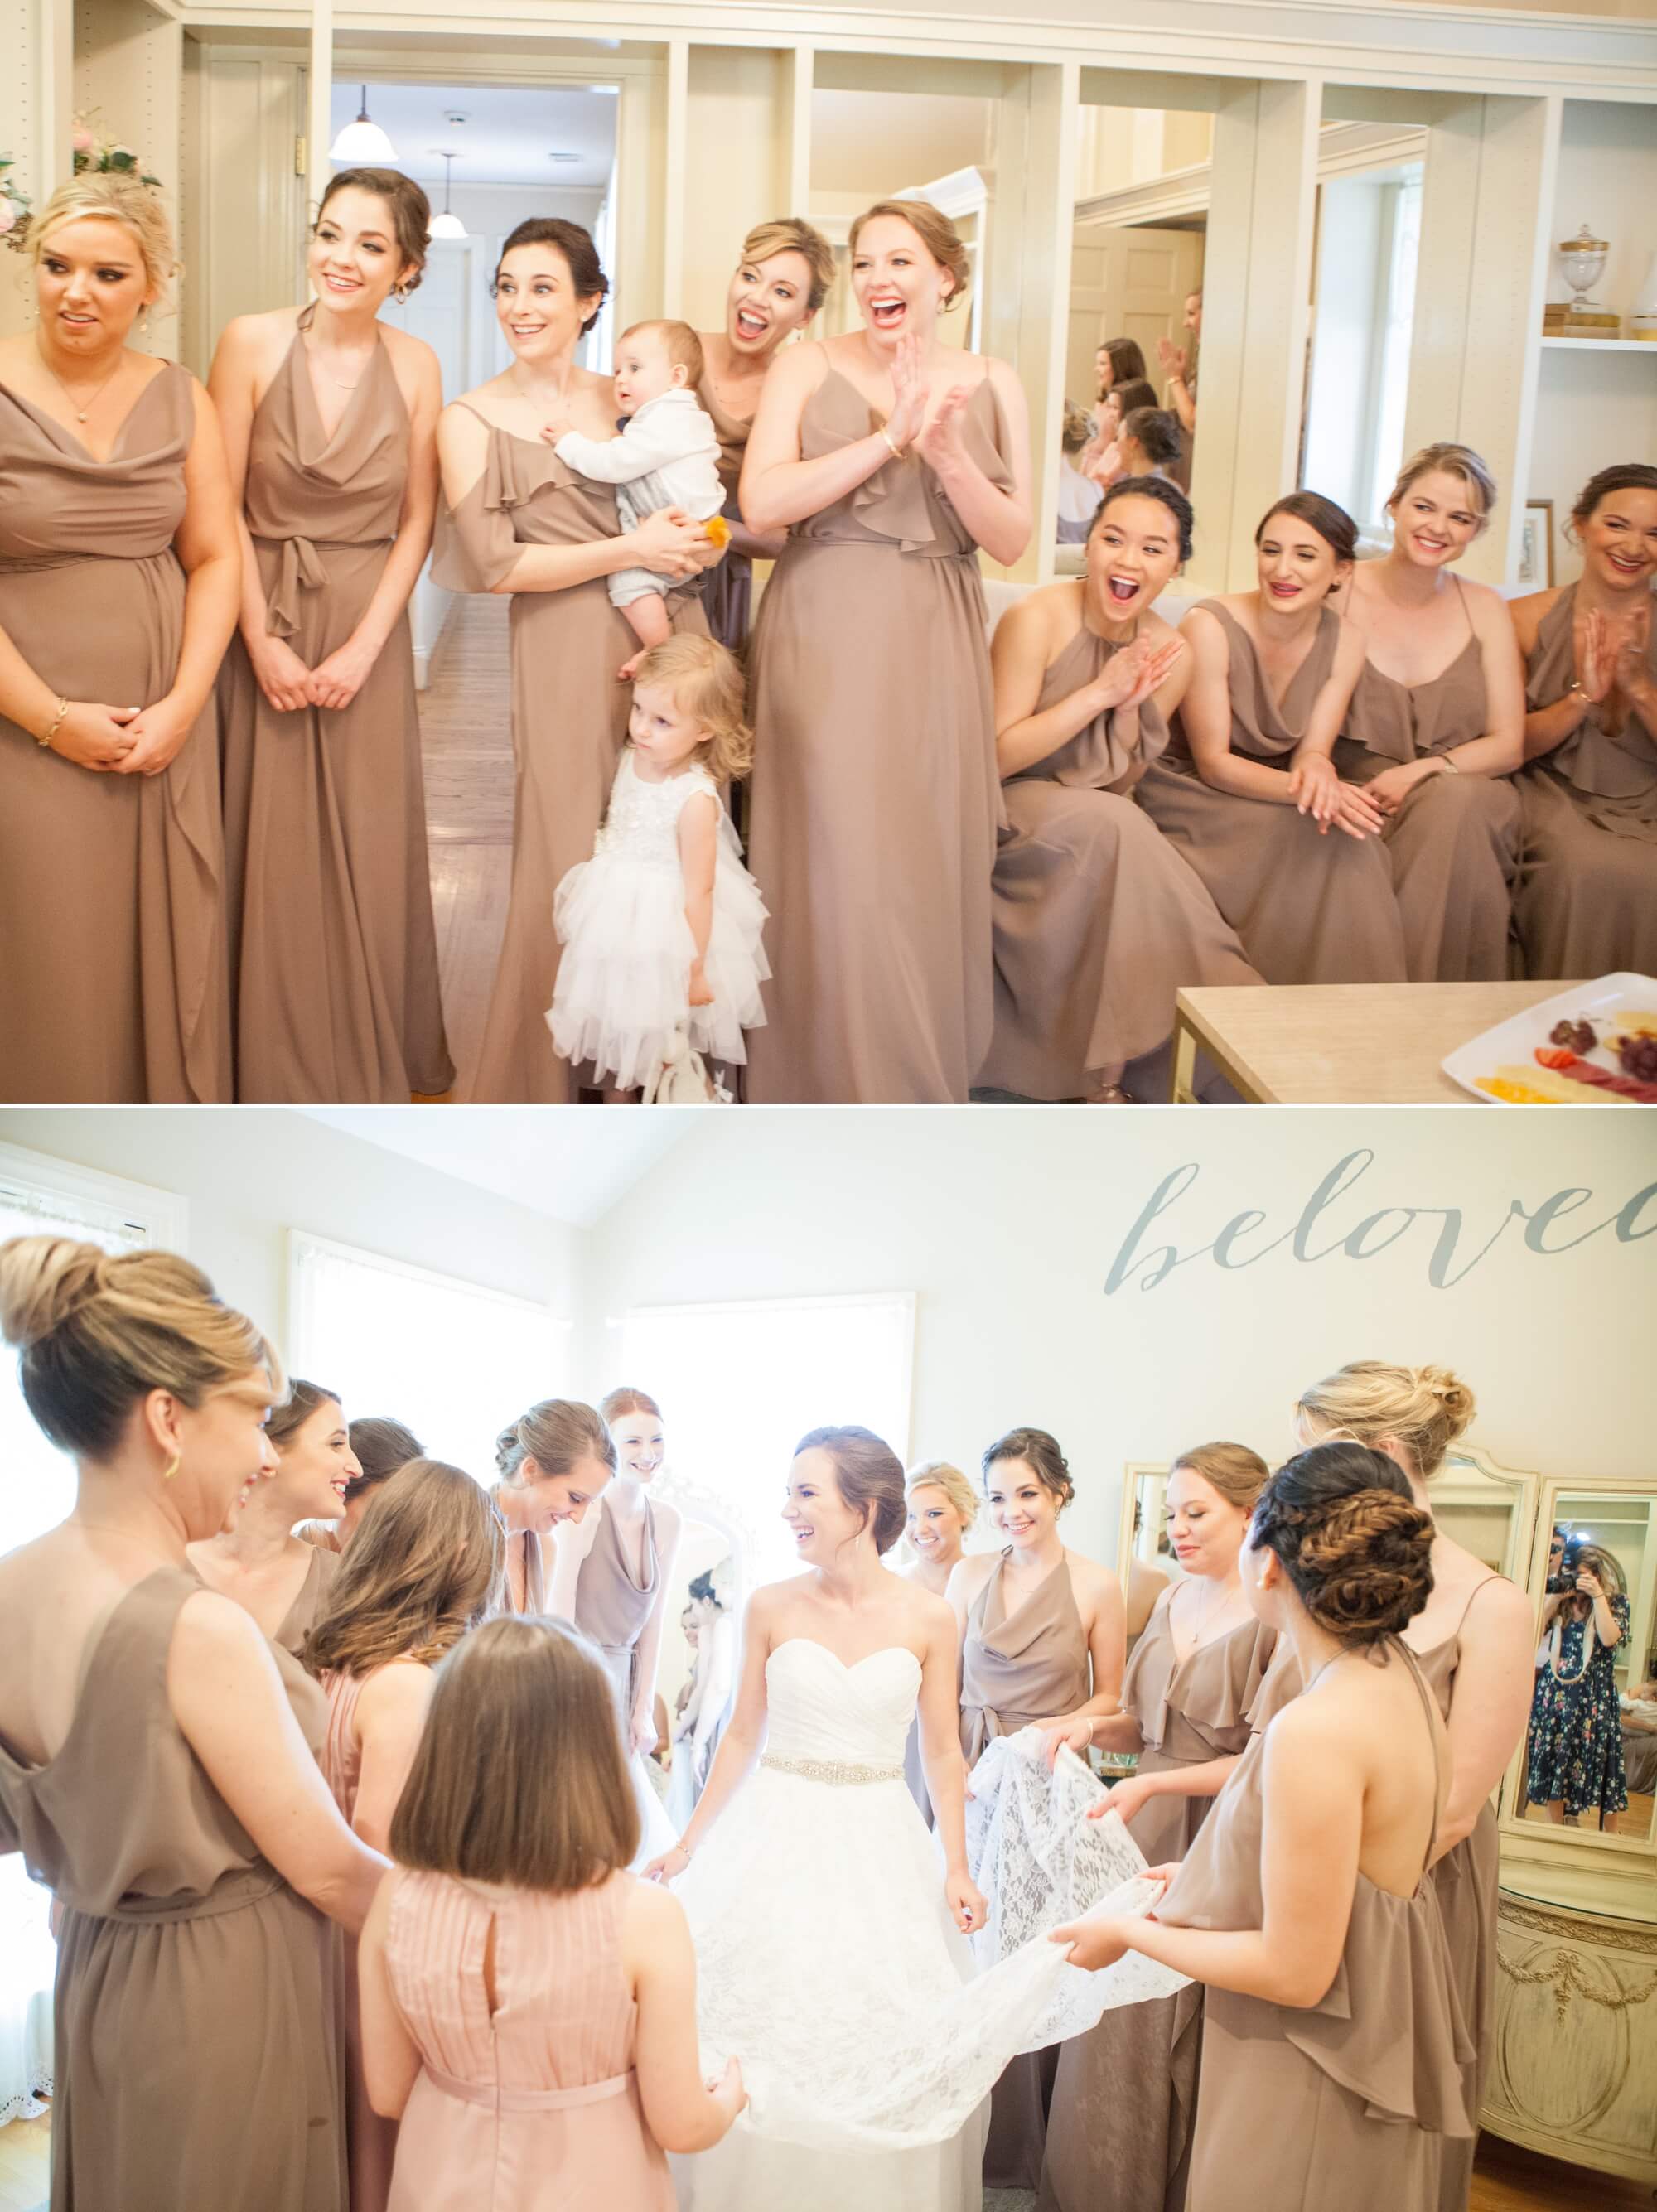 Bridal party reacts to bride in wedding dress. Spring wedding at Cedarwood Weddings in Nashville, TN. Photo by Krista Lee Photography, from Sam and Izzy's wedding day.